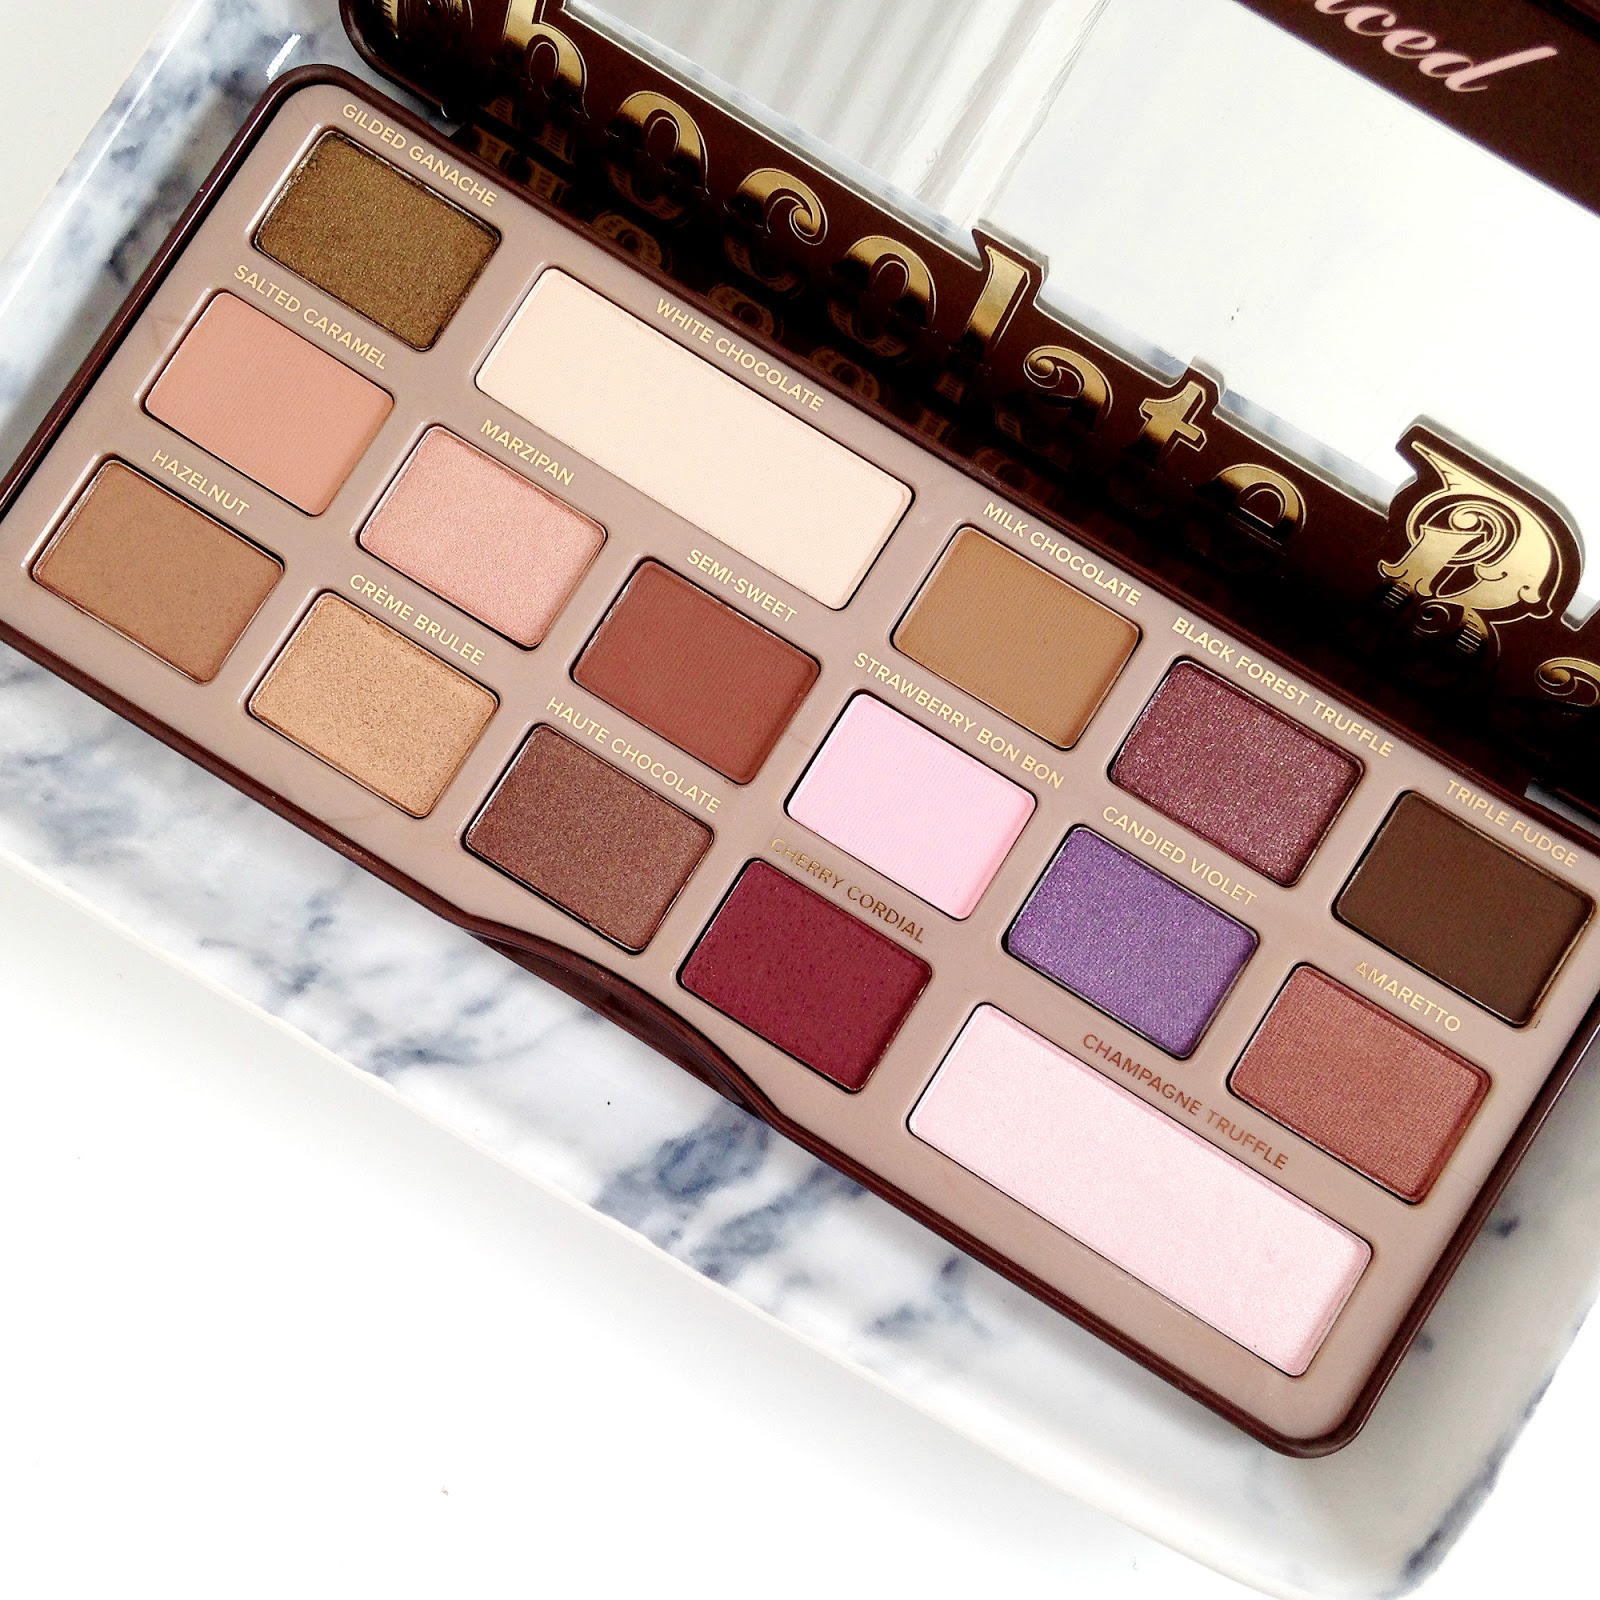 Too Faced Chocolate Bar Palette Review and Swatches